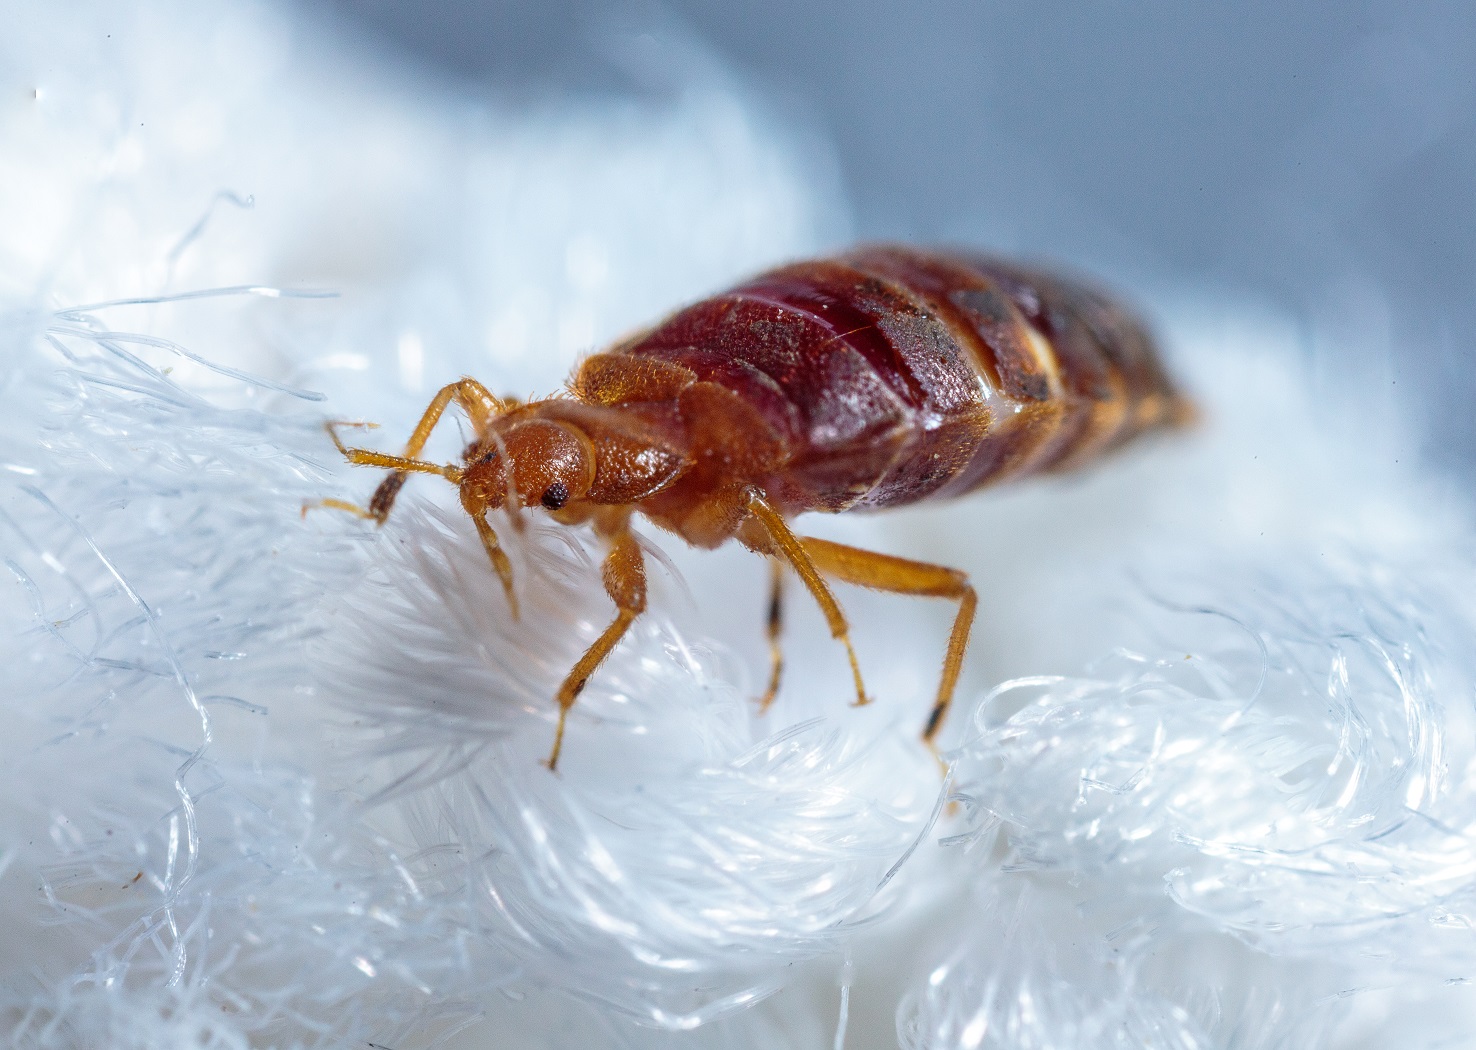 Bed Bugs, Entomology
Bed bugs explore different materials in the lab.